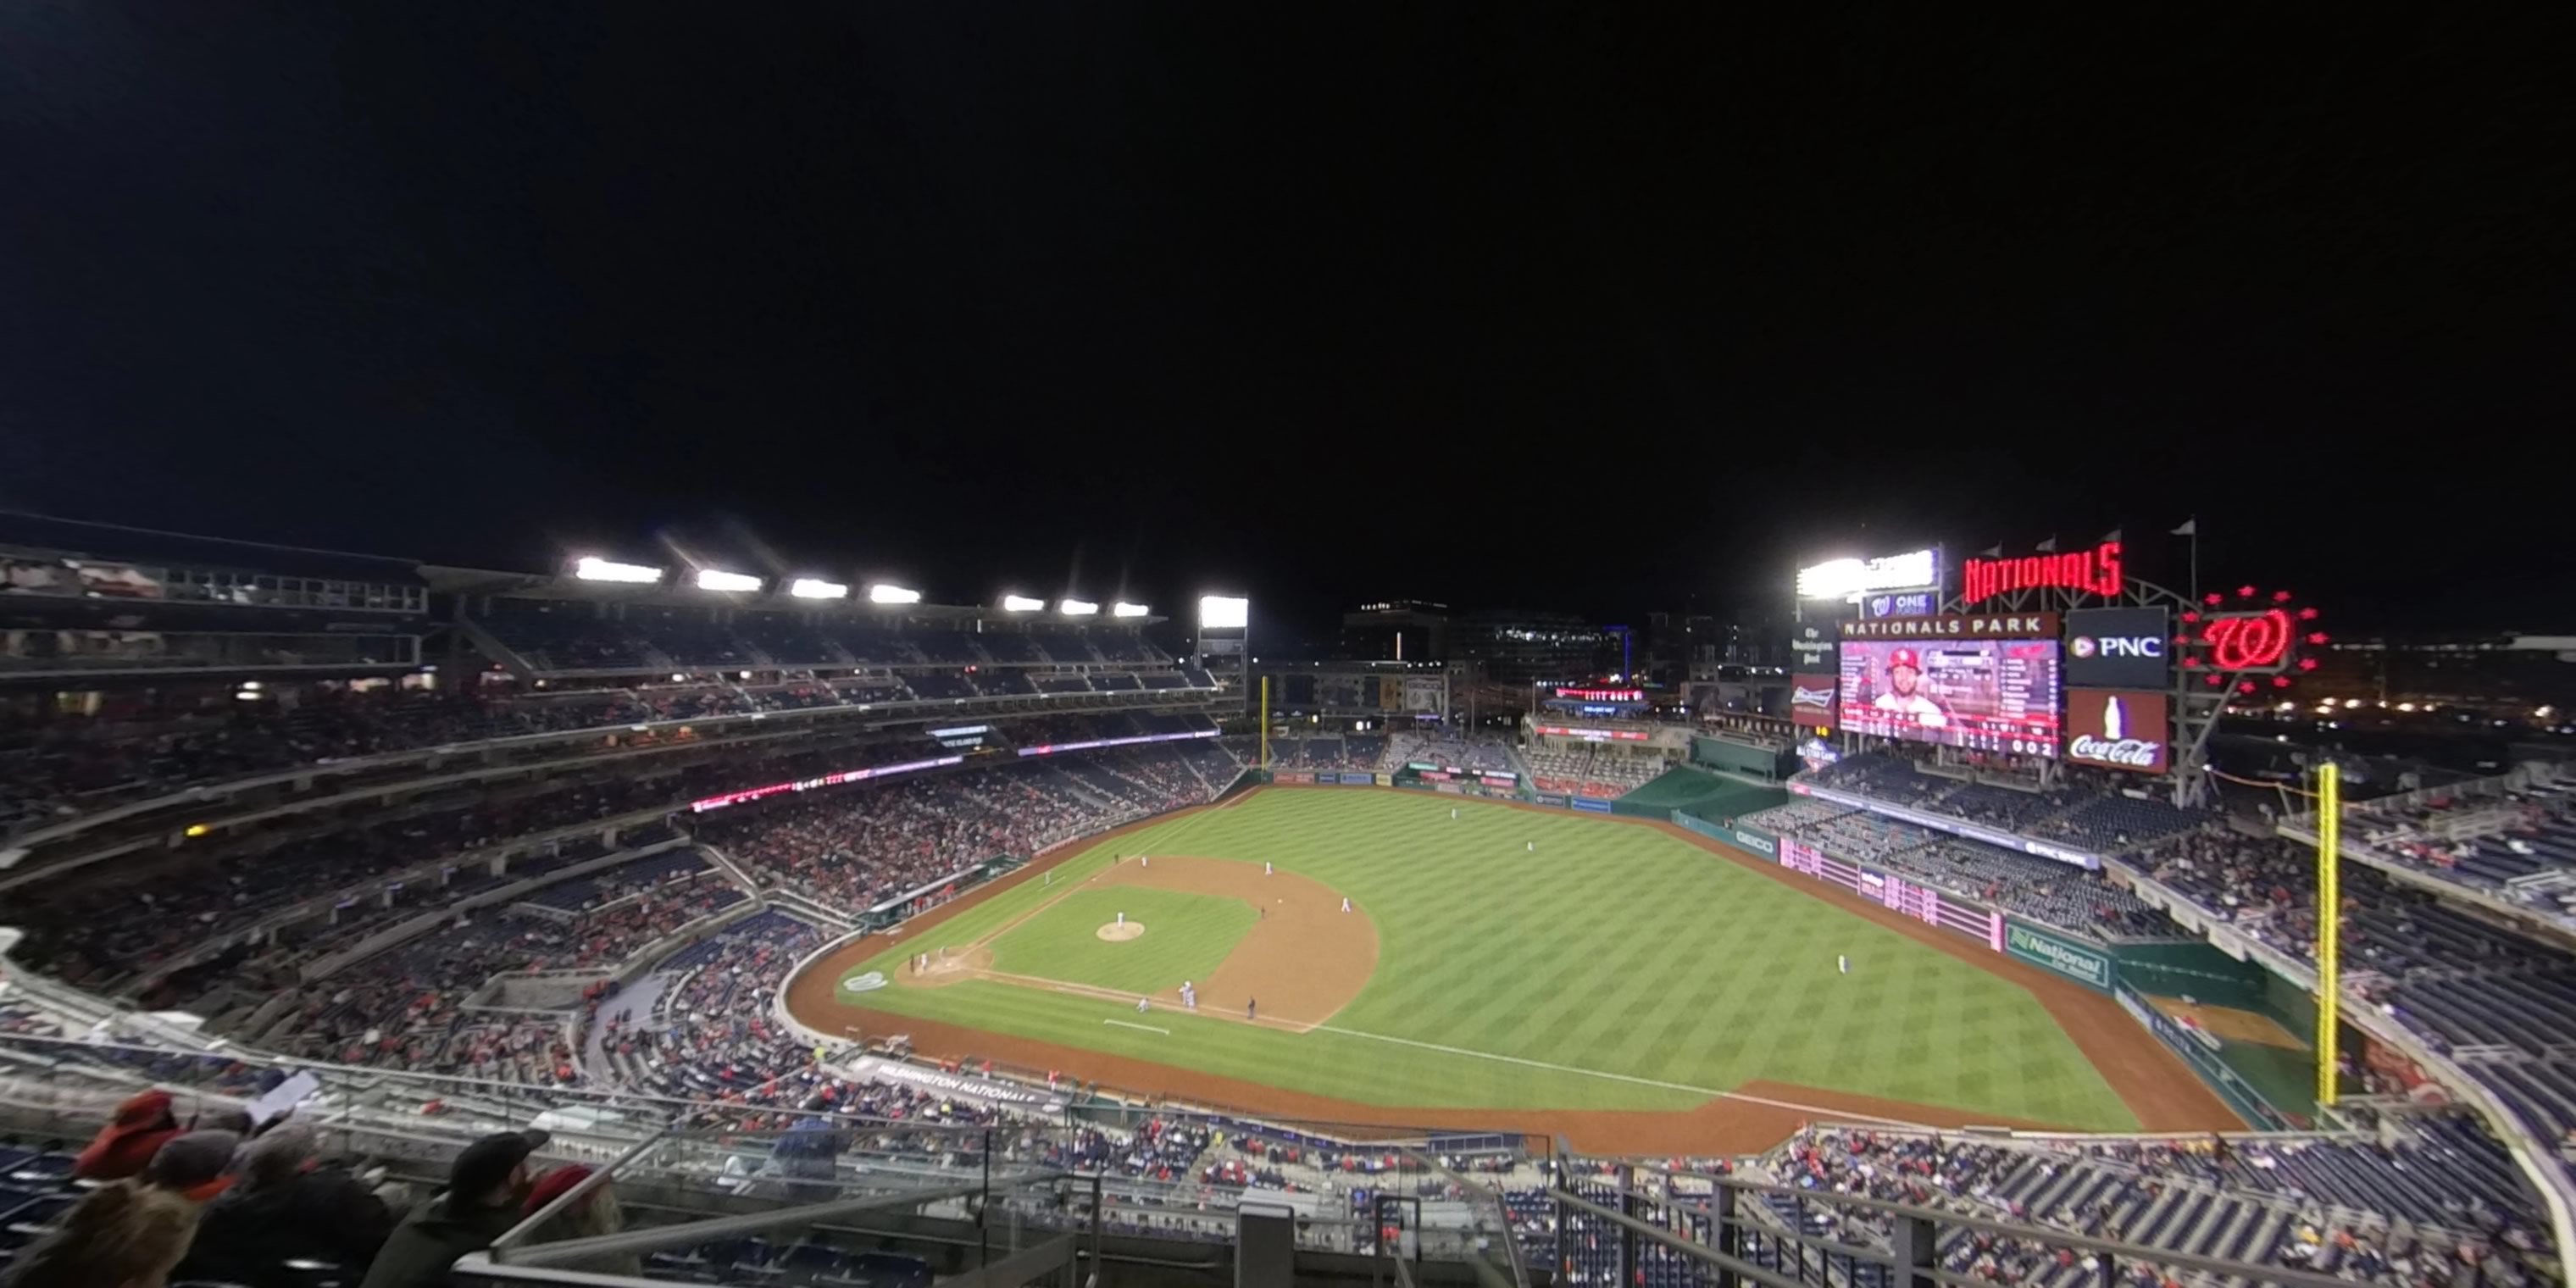 section 420 panoramic seat view  for baseball - nationals park